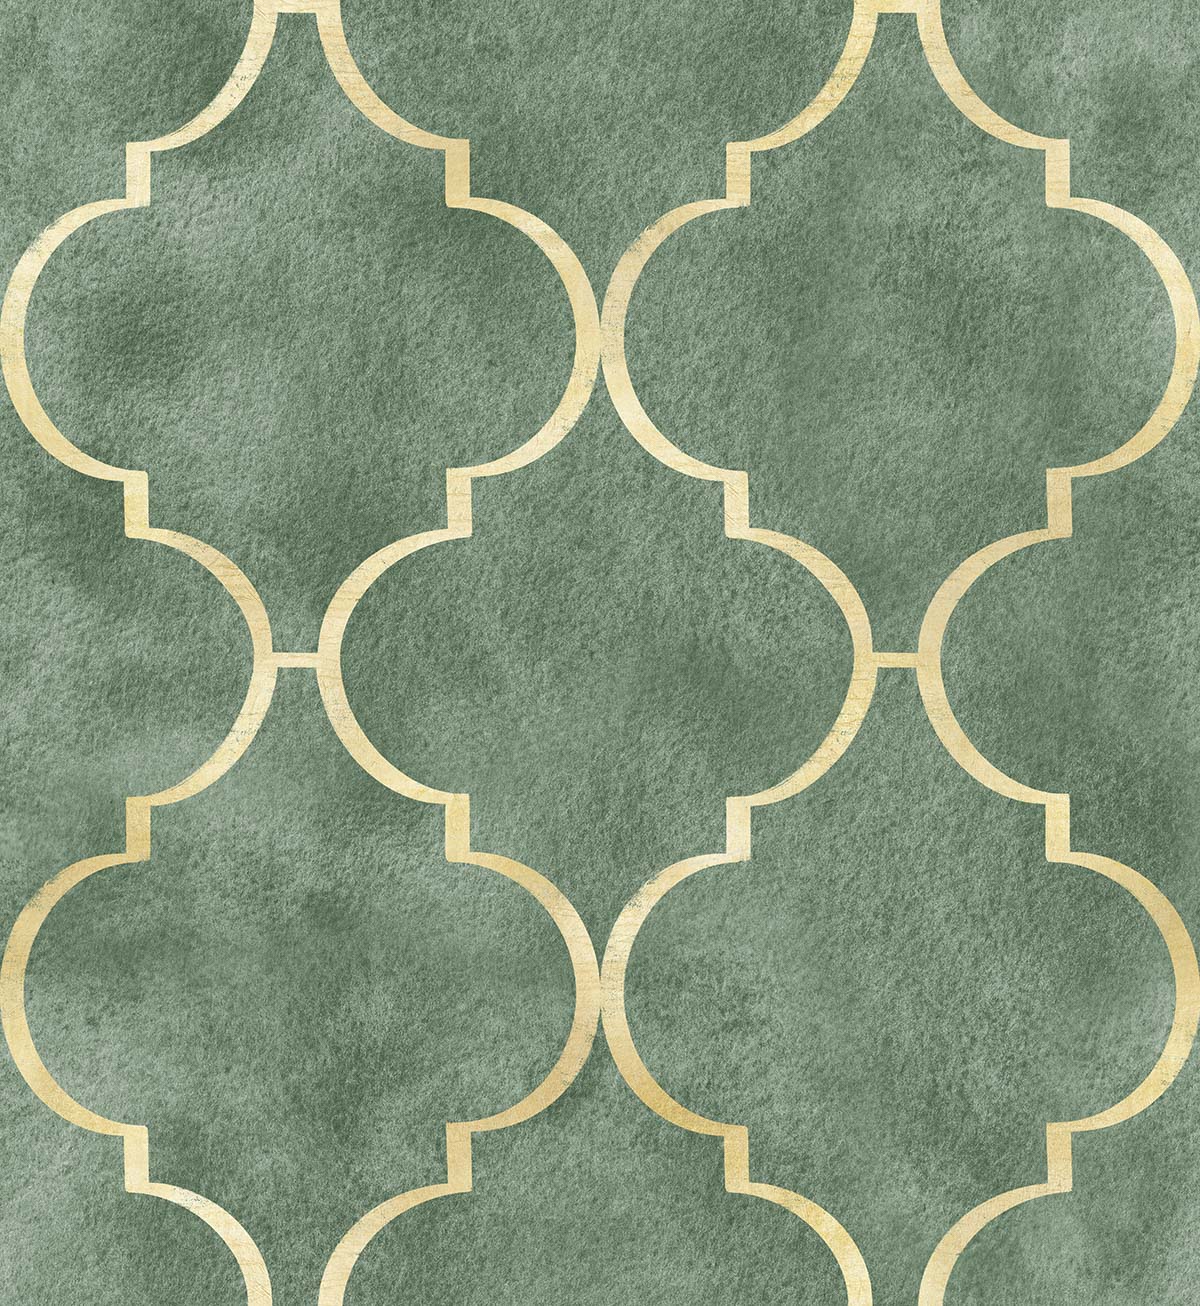 Moroccan Trellis Patterned Wallpaper for Wall